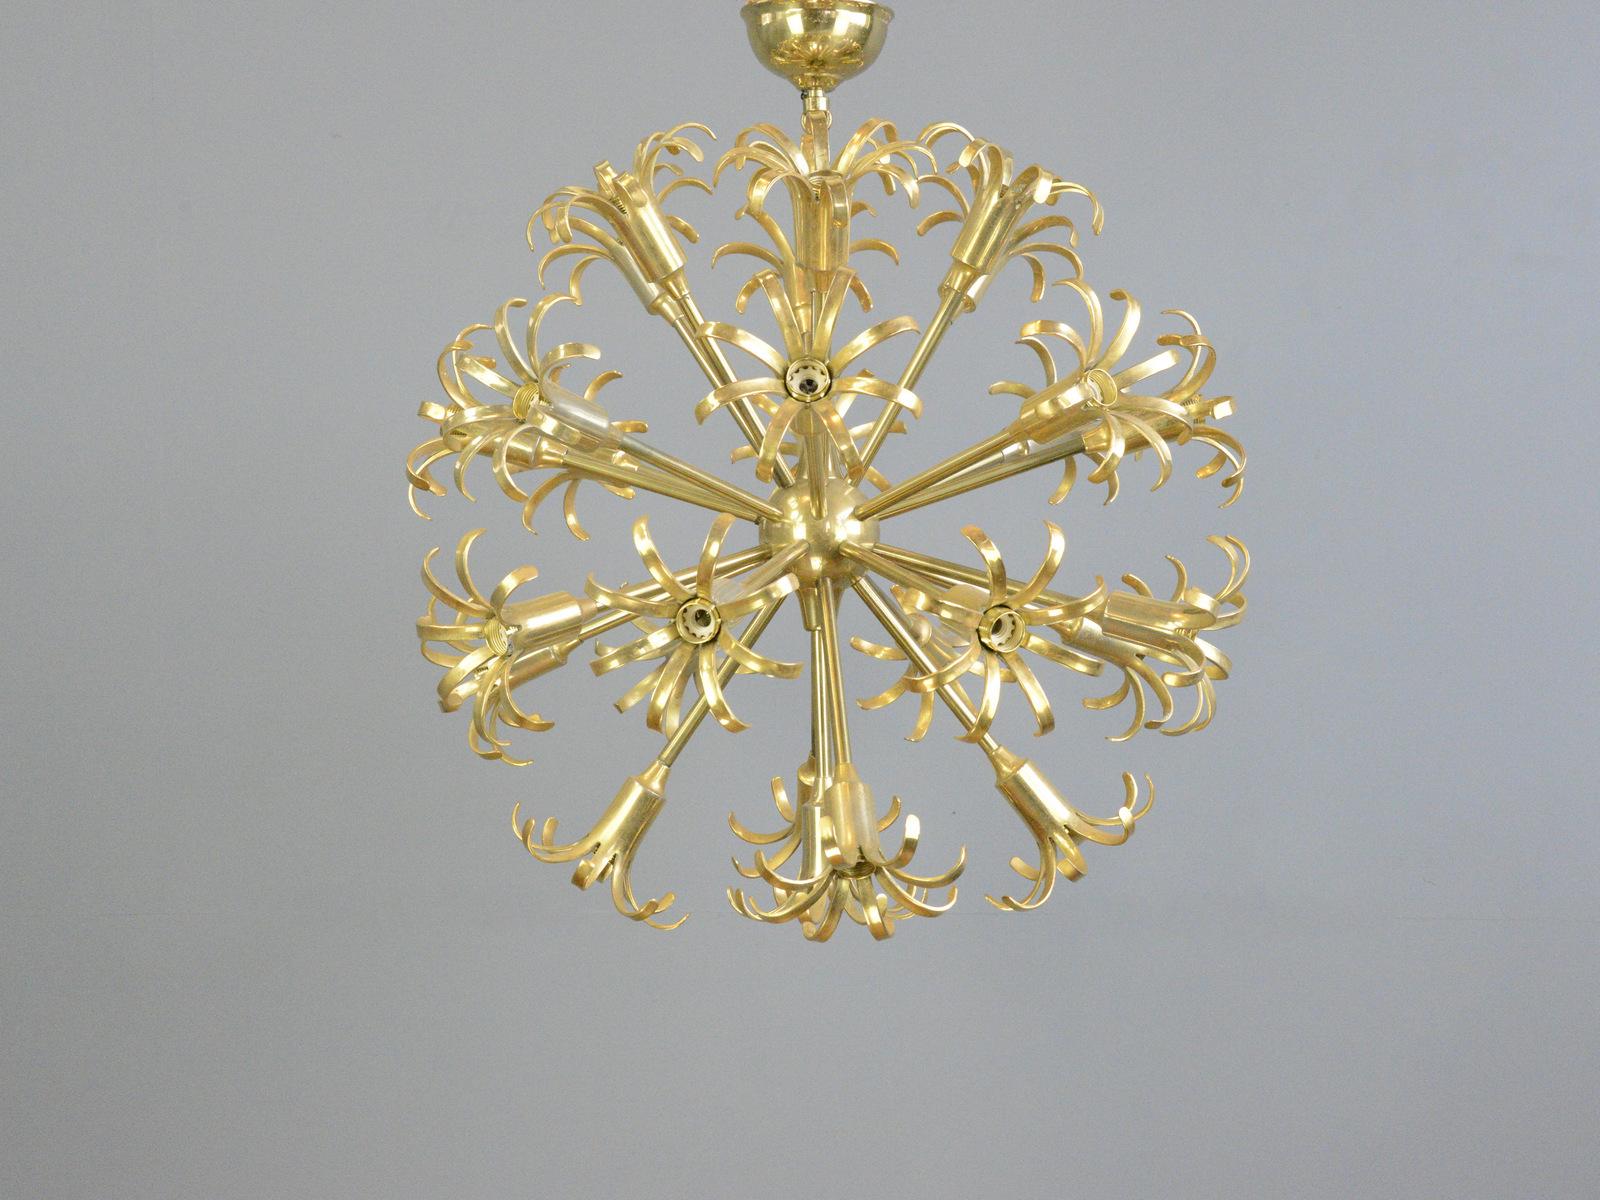 Midcentury Dandelion Chandelier circa 1950s.

- Brass stems
- 26 outlets
- Takes E14 fitting bulbs
- German ~ 1950s
- 65cm wide x 75cm tall inc ceiling rose

Condition Report

Fully re wired with modern electrical components, some light